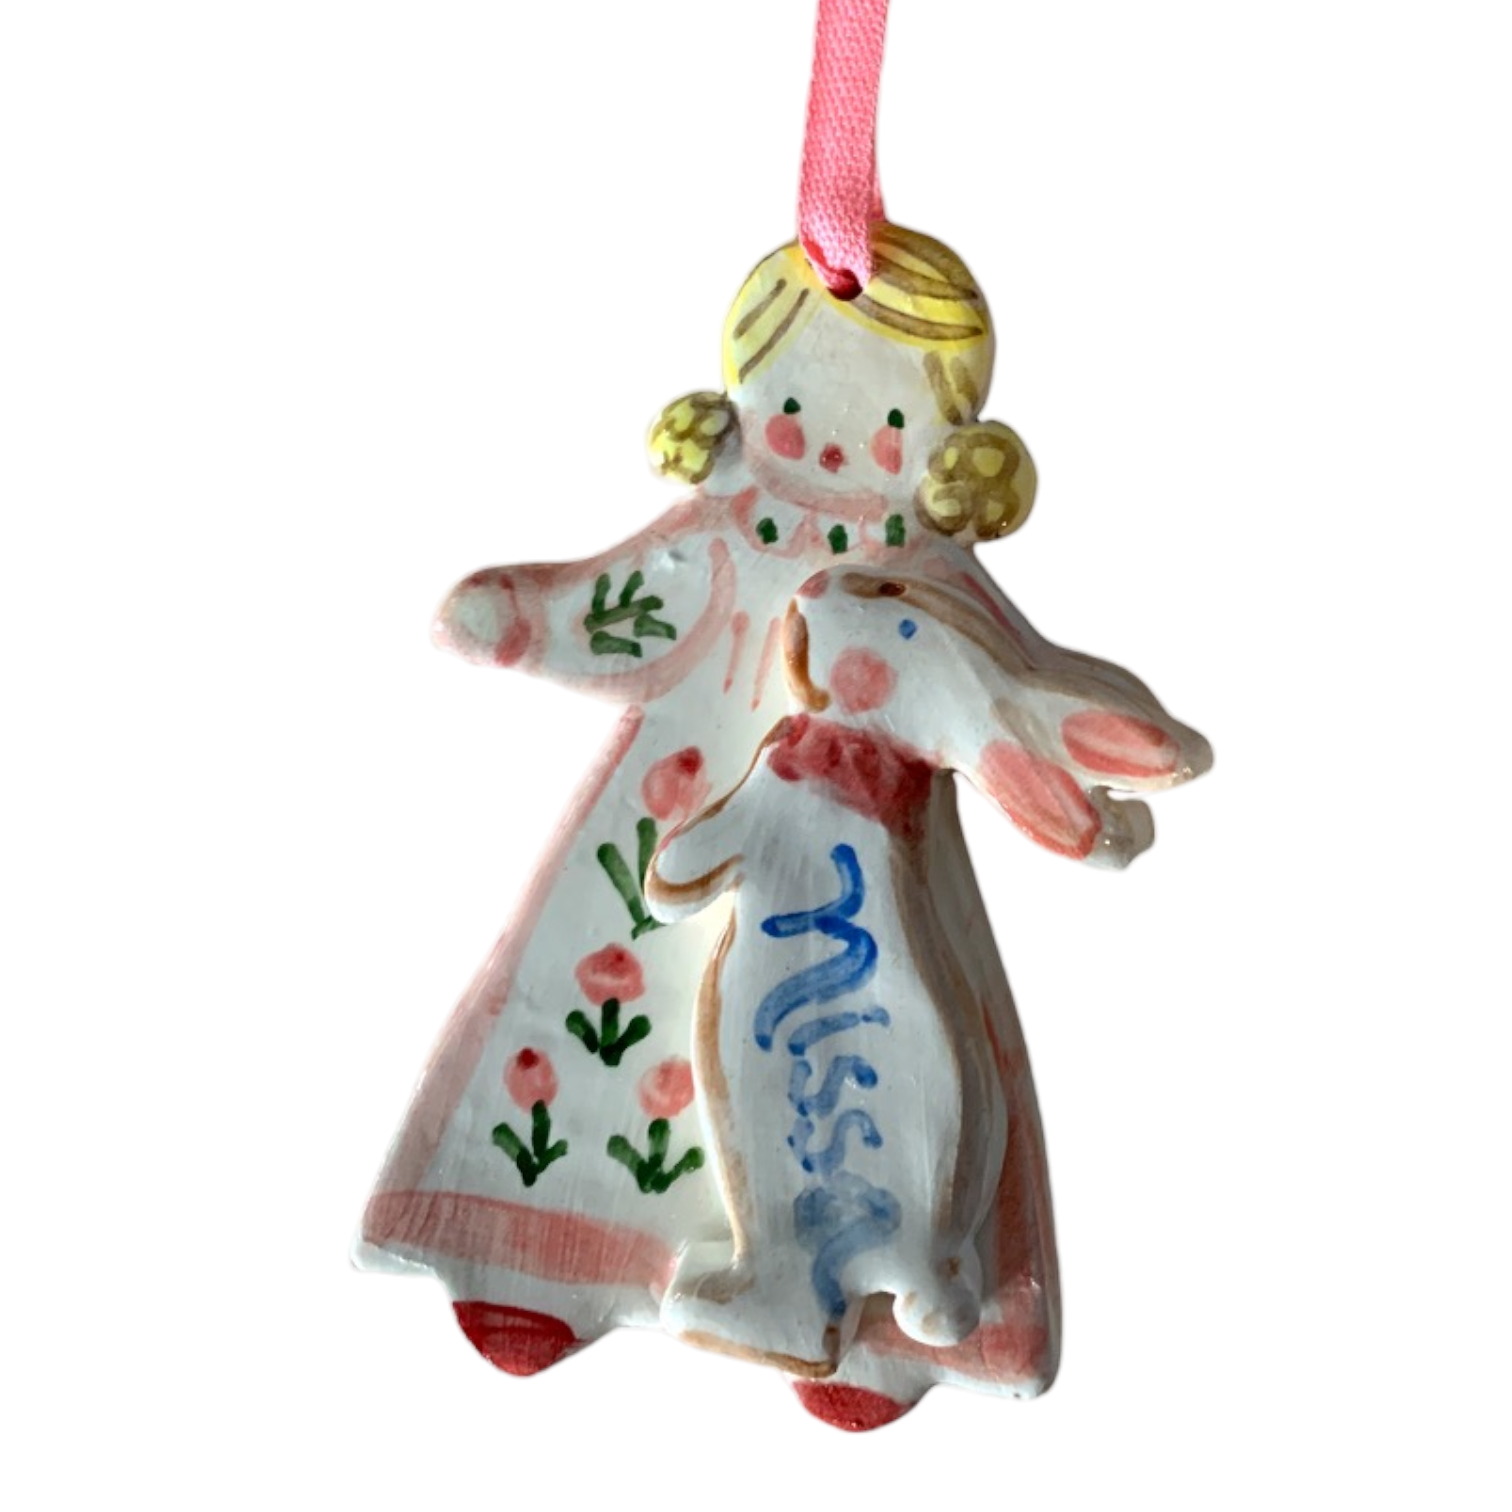 Bunny and Friend Ornament - Girl